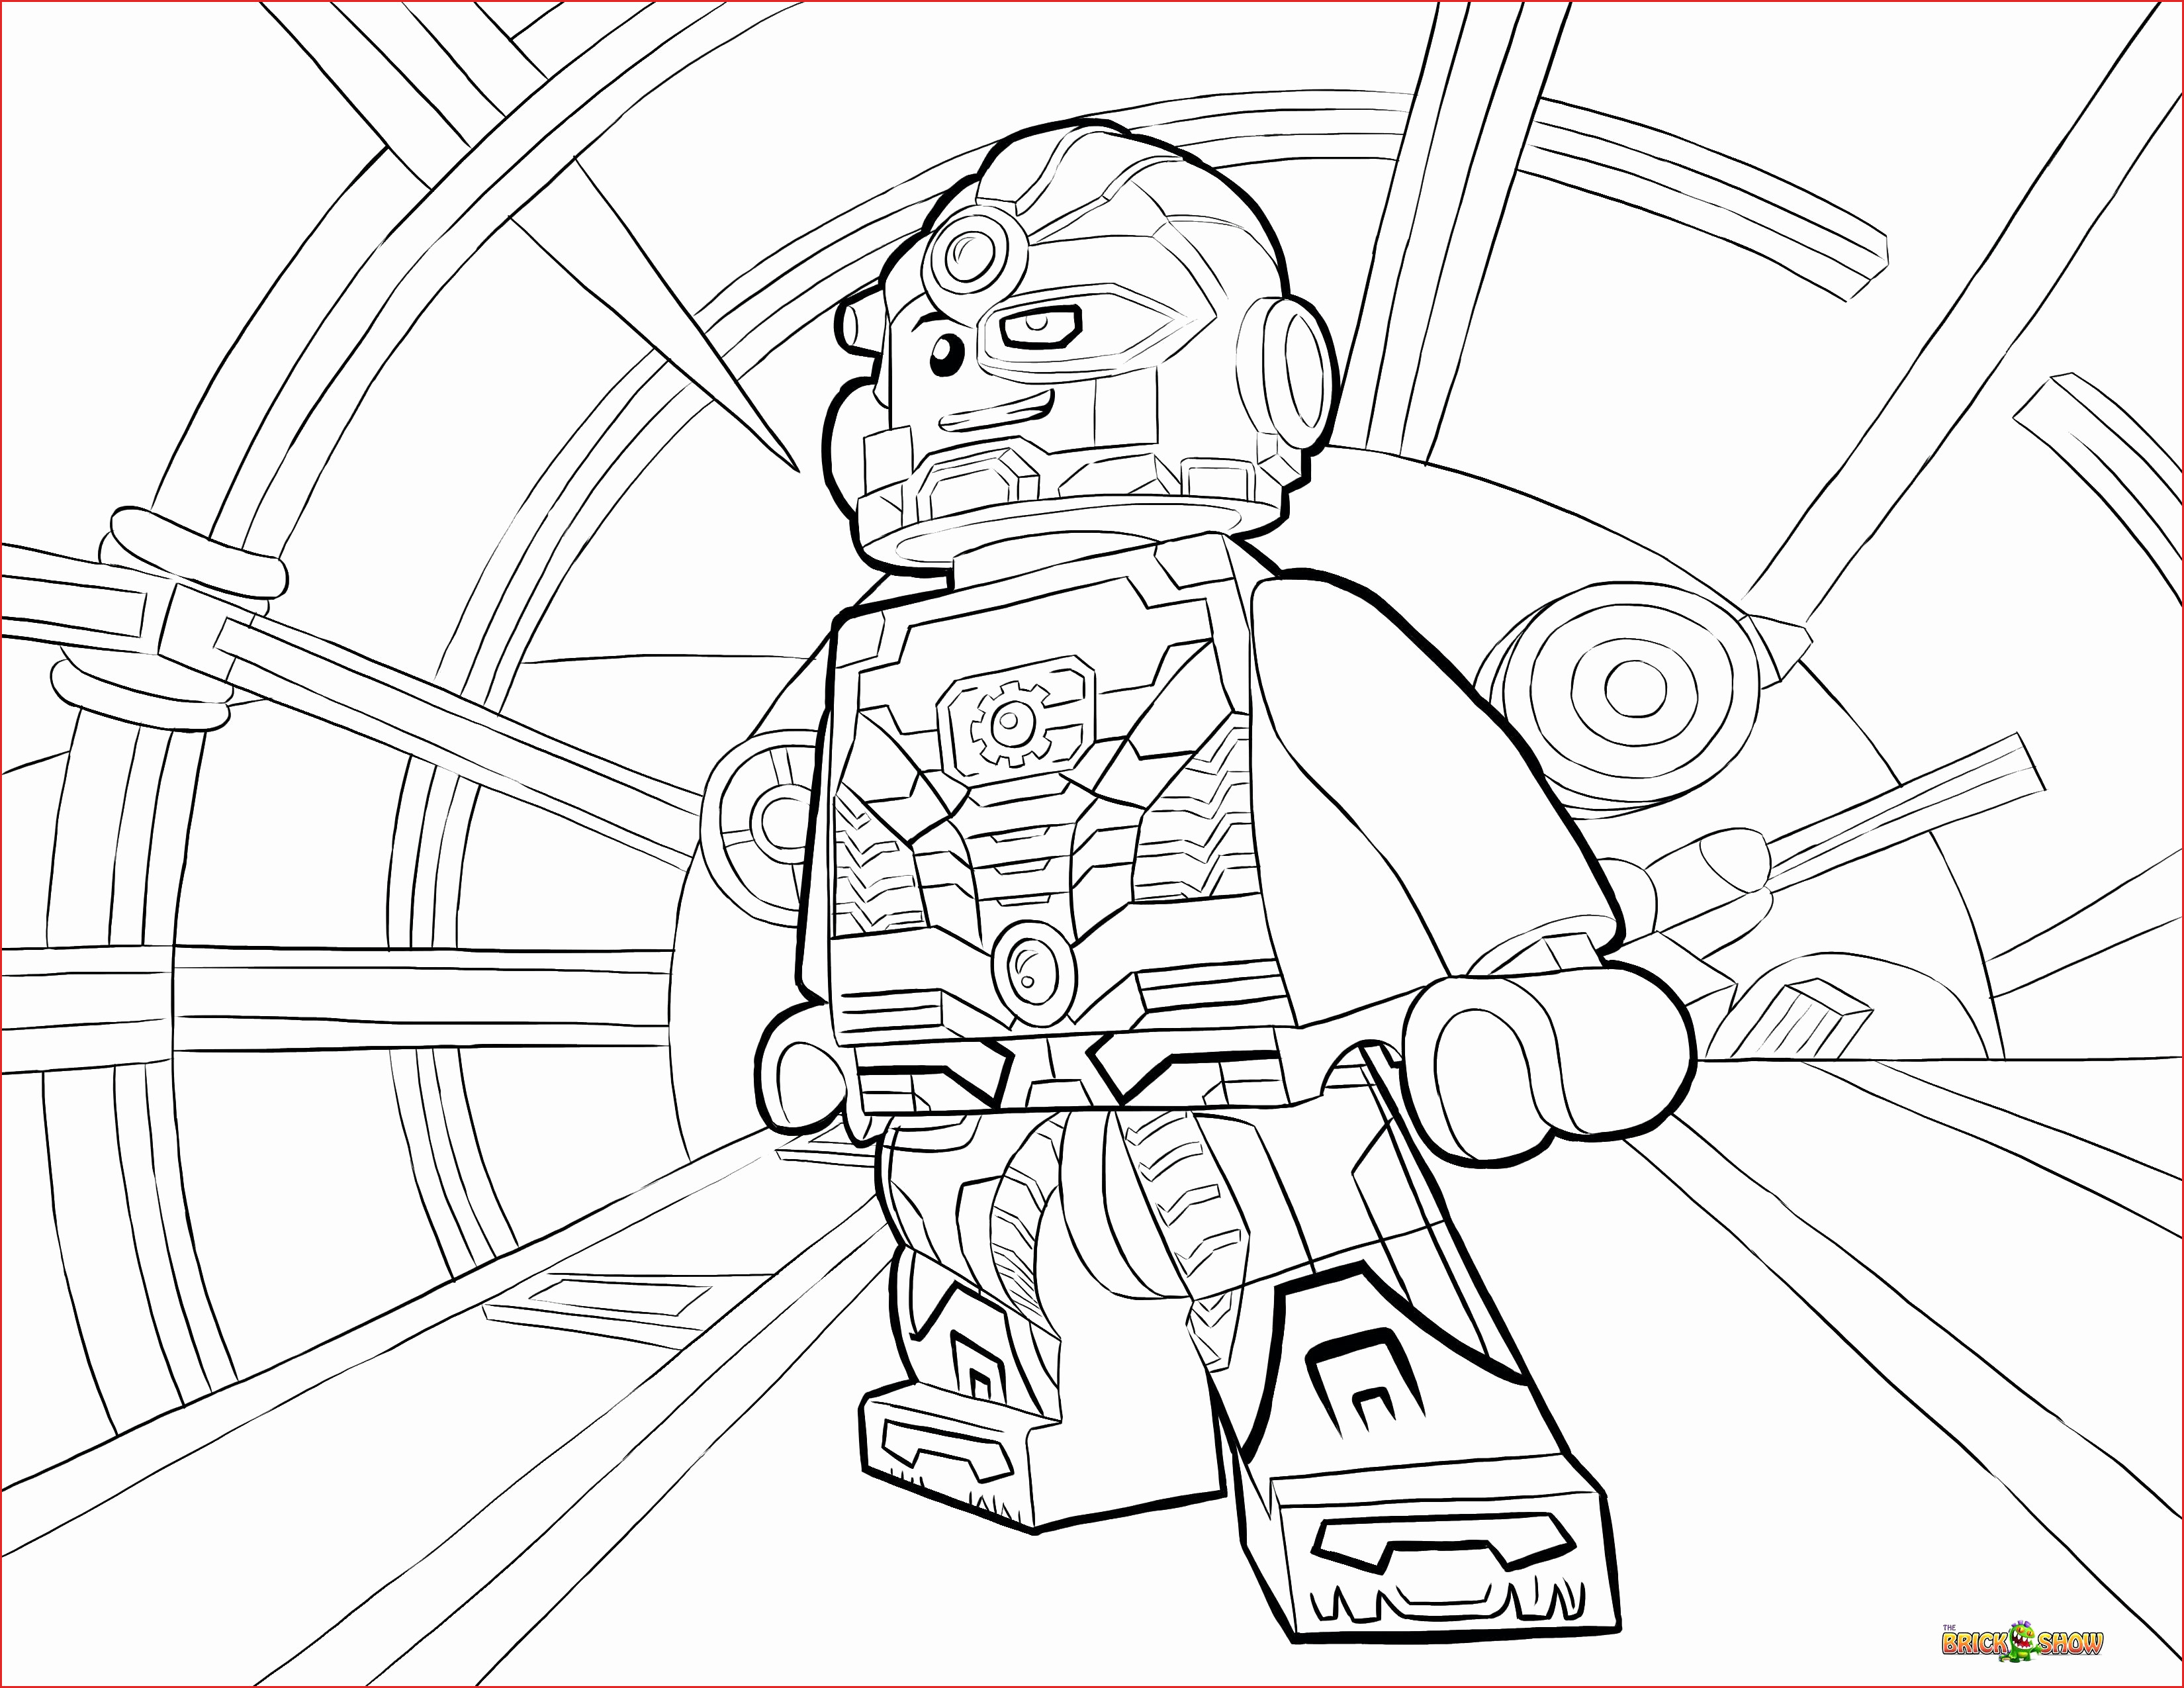 Coloring Pages : Coloring Pages Superhero The Flash Lego ...